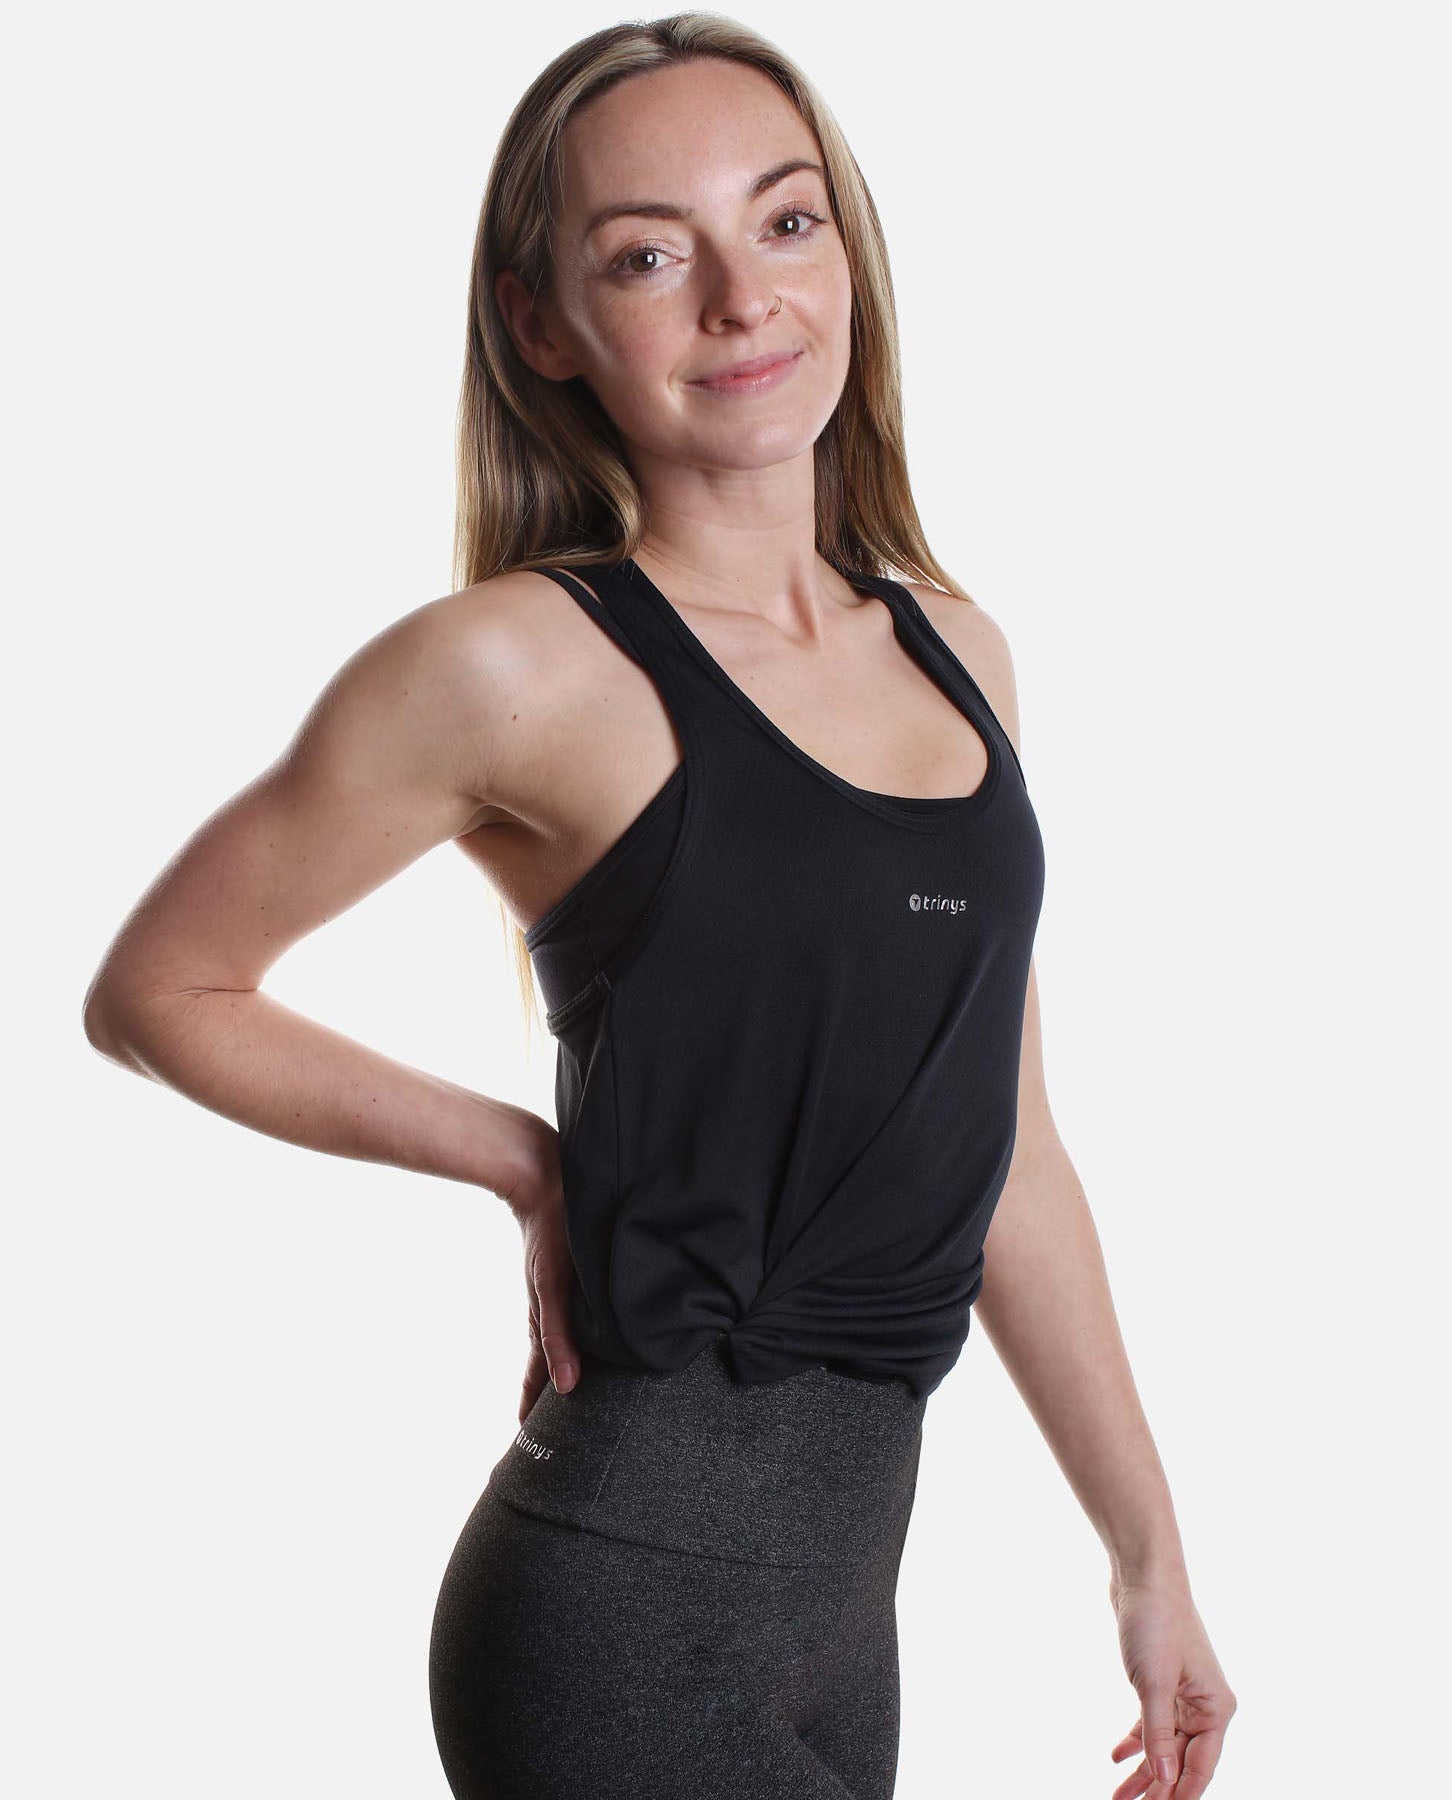 Fitness Tank Top - A 287